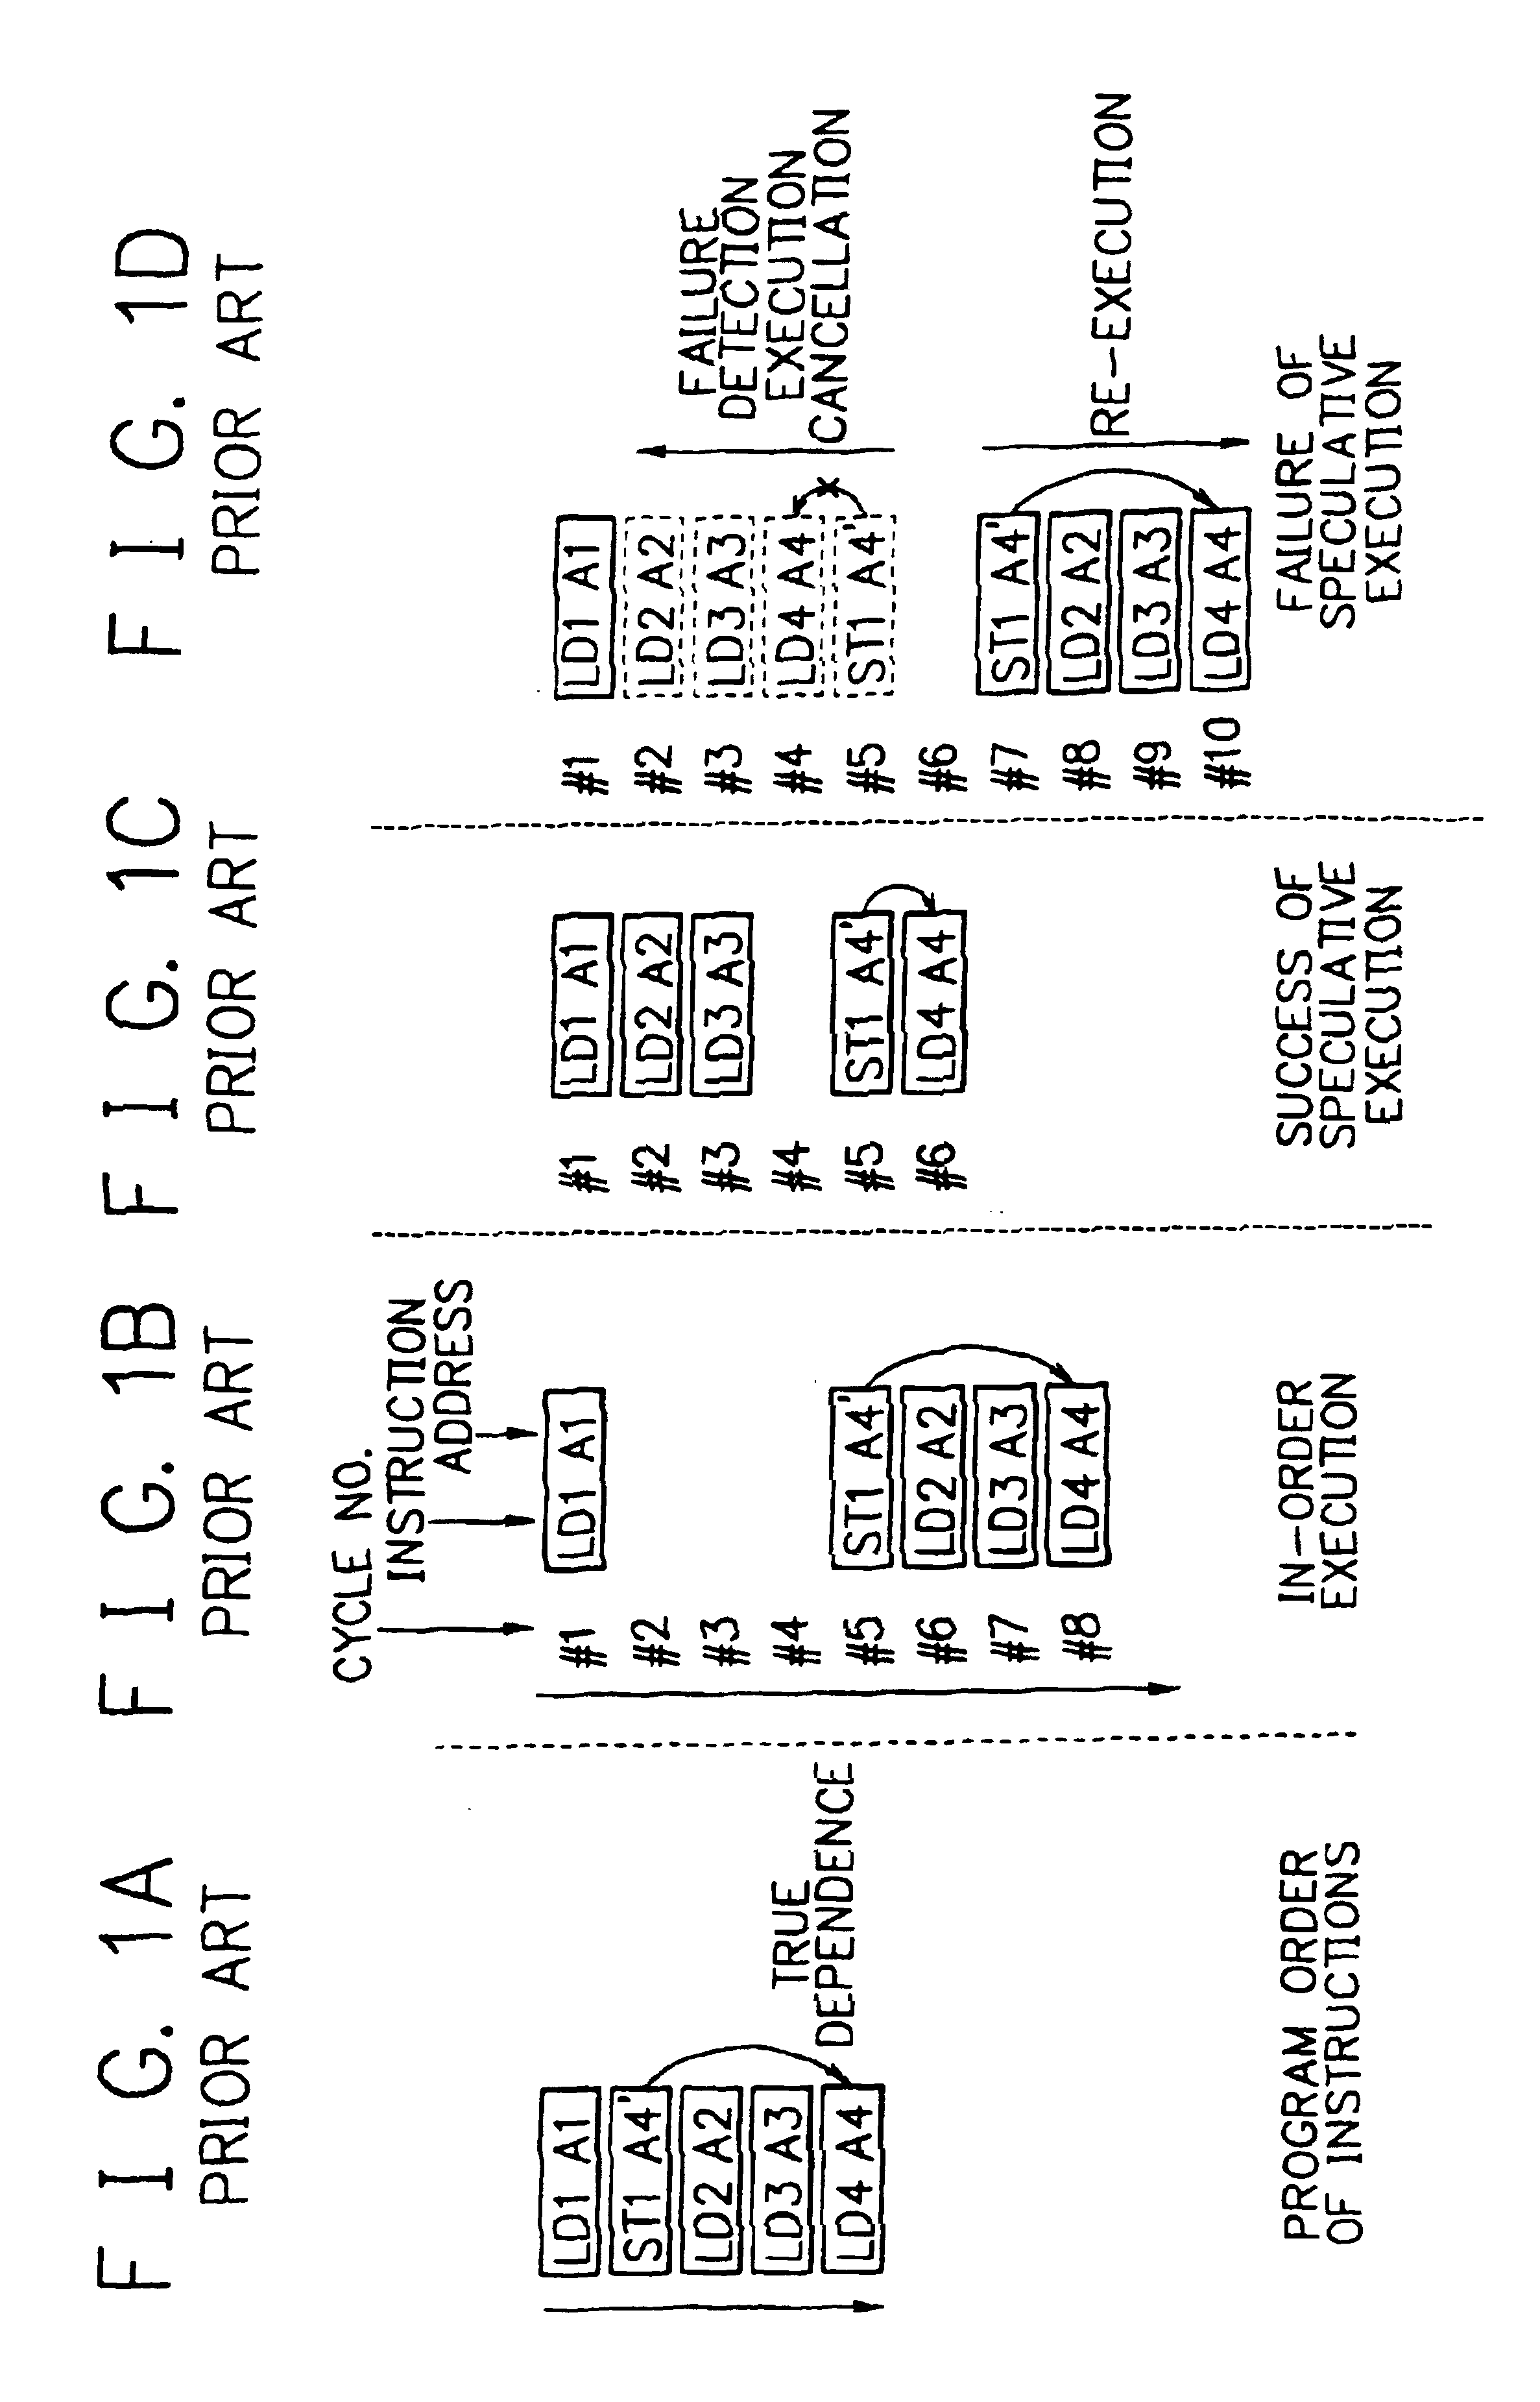 Processor, multiprocessor system and method for speculatively executing memory operations using memory target addresses of the memory operations to index into a speculative execution result history storage means to predict the outcome of the memory operation